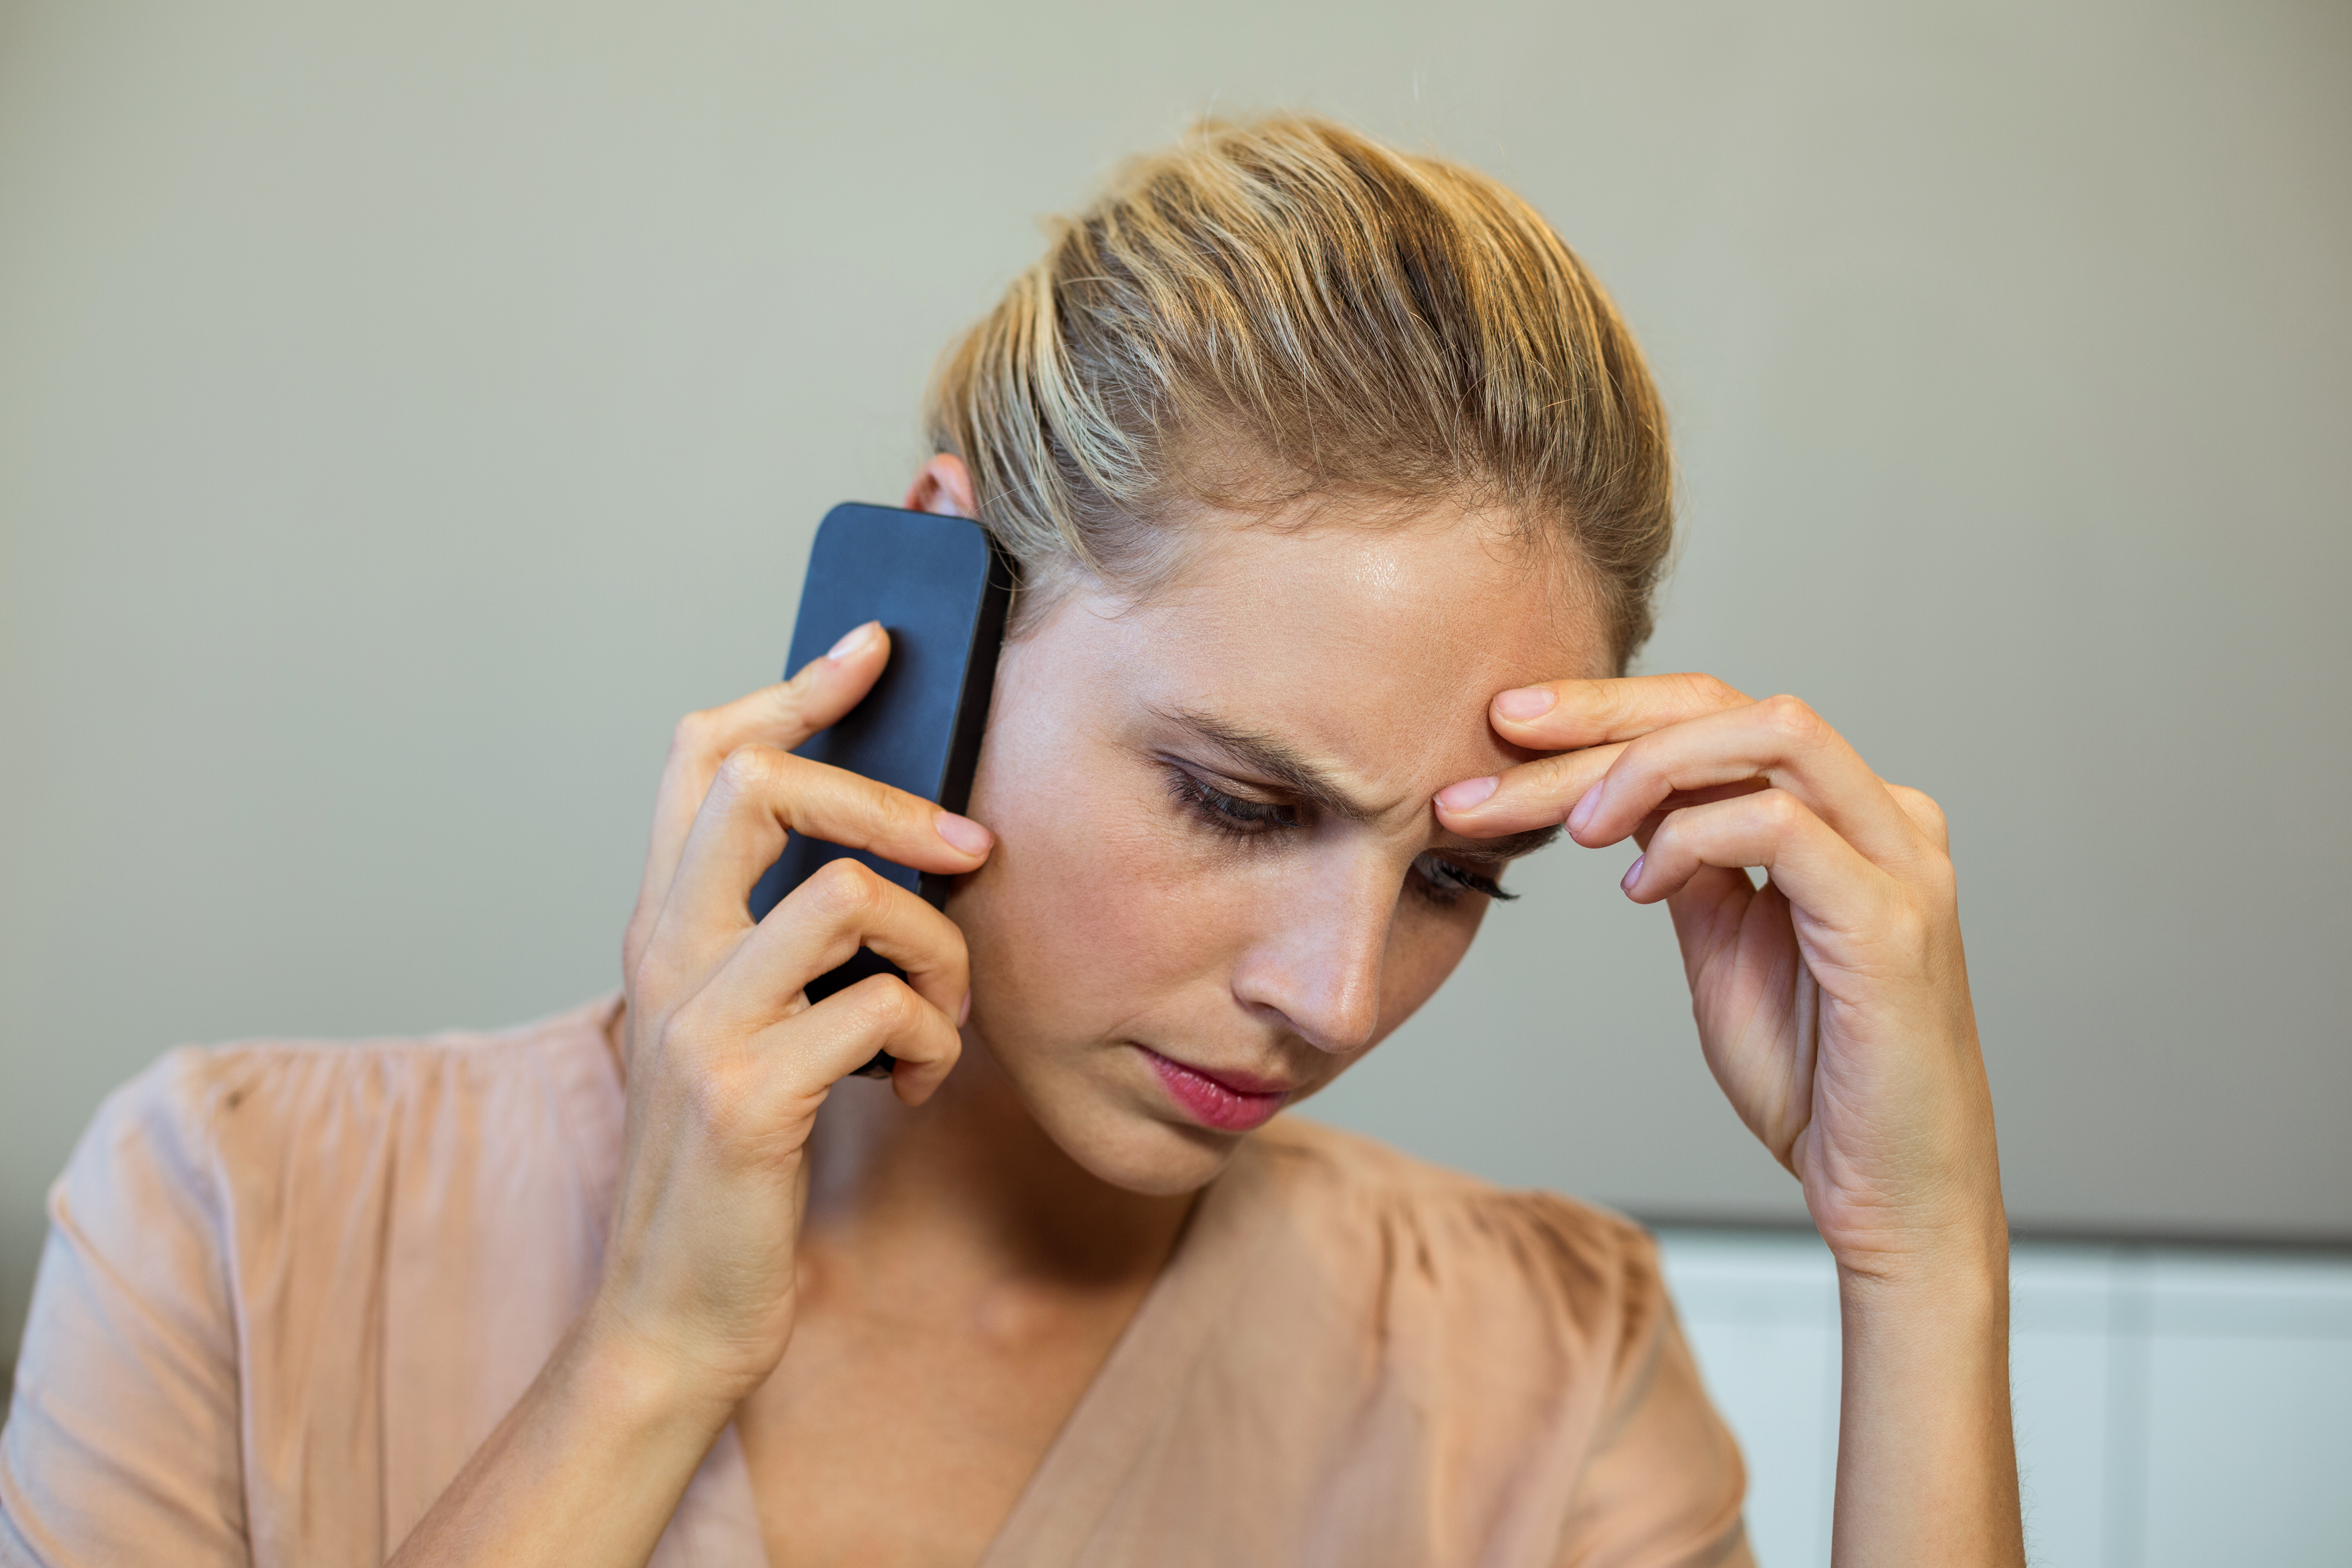 A woman looking concerned while on the phone | Source: Shutterstock